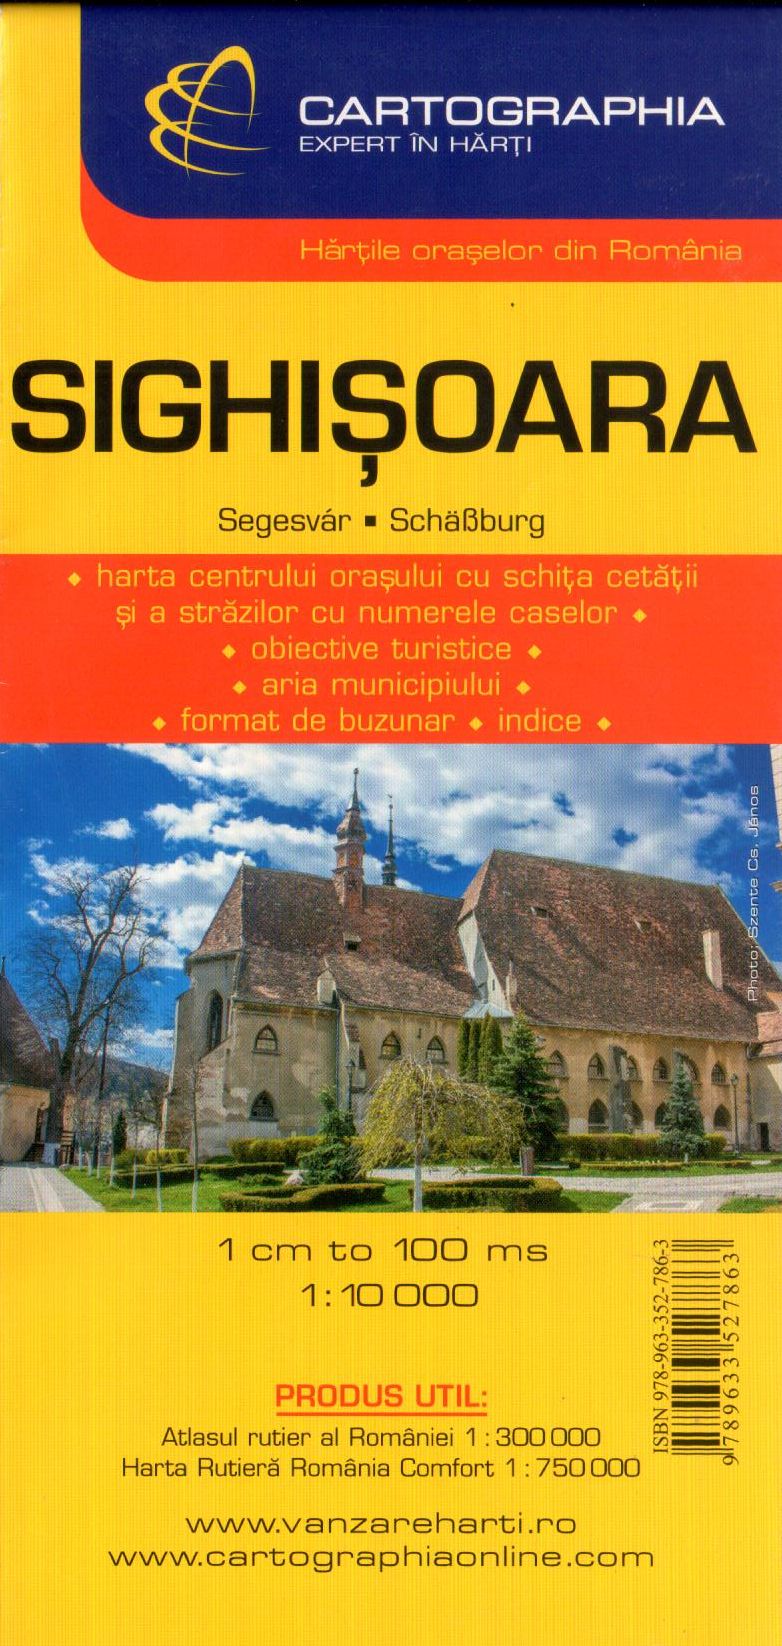  Sighisoara city map with index of streets and sights